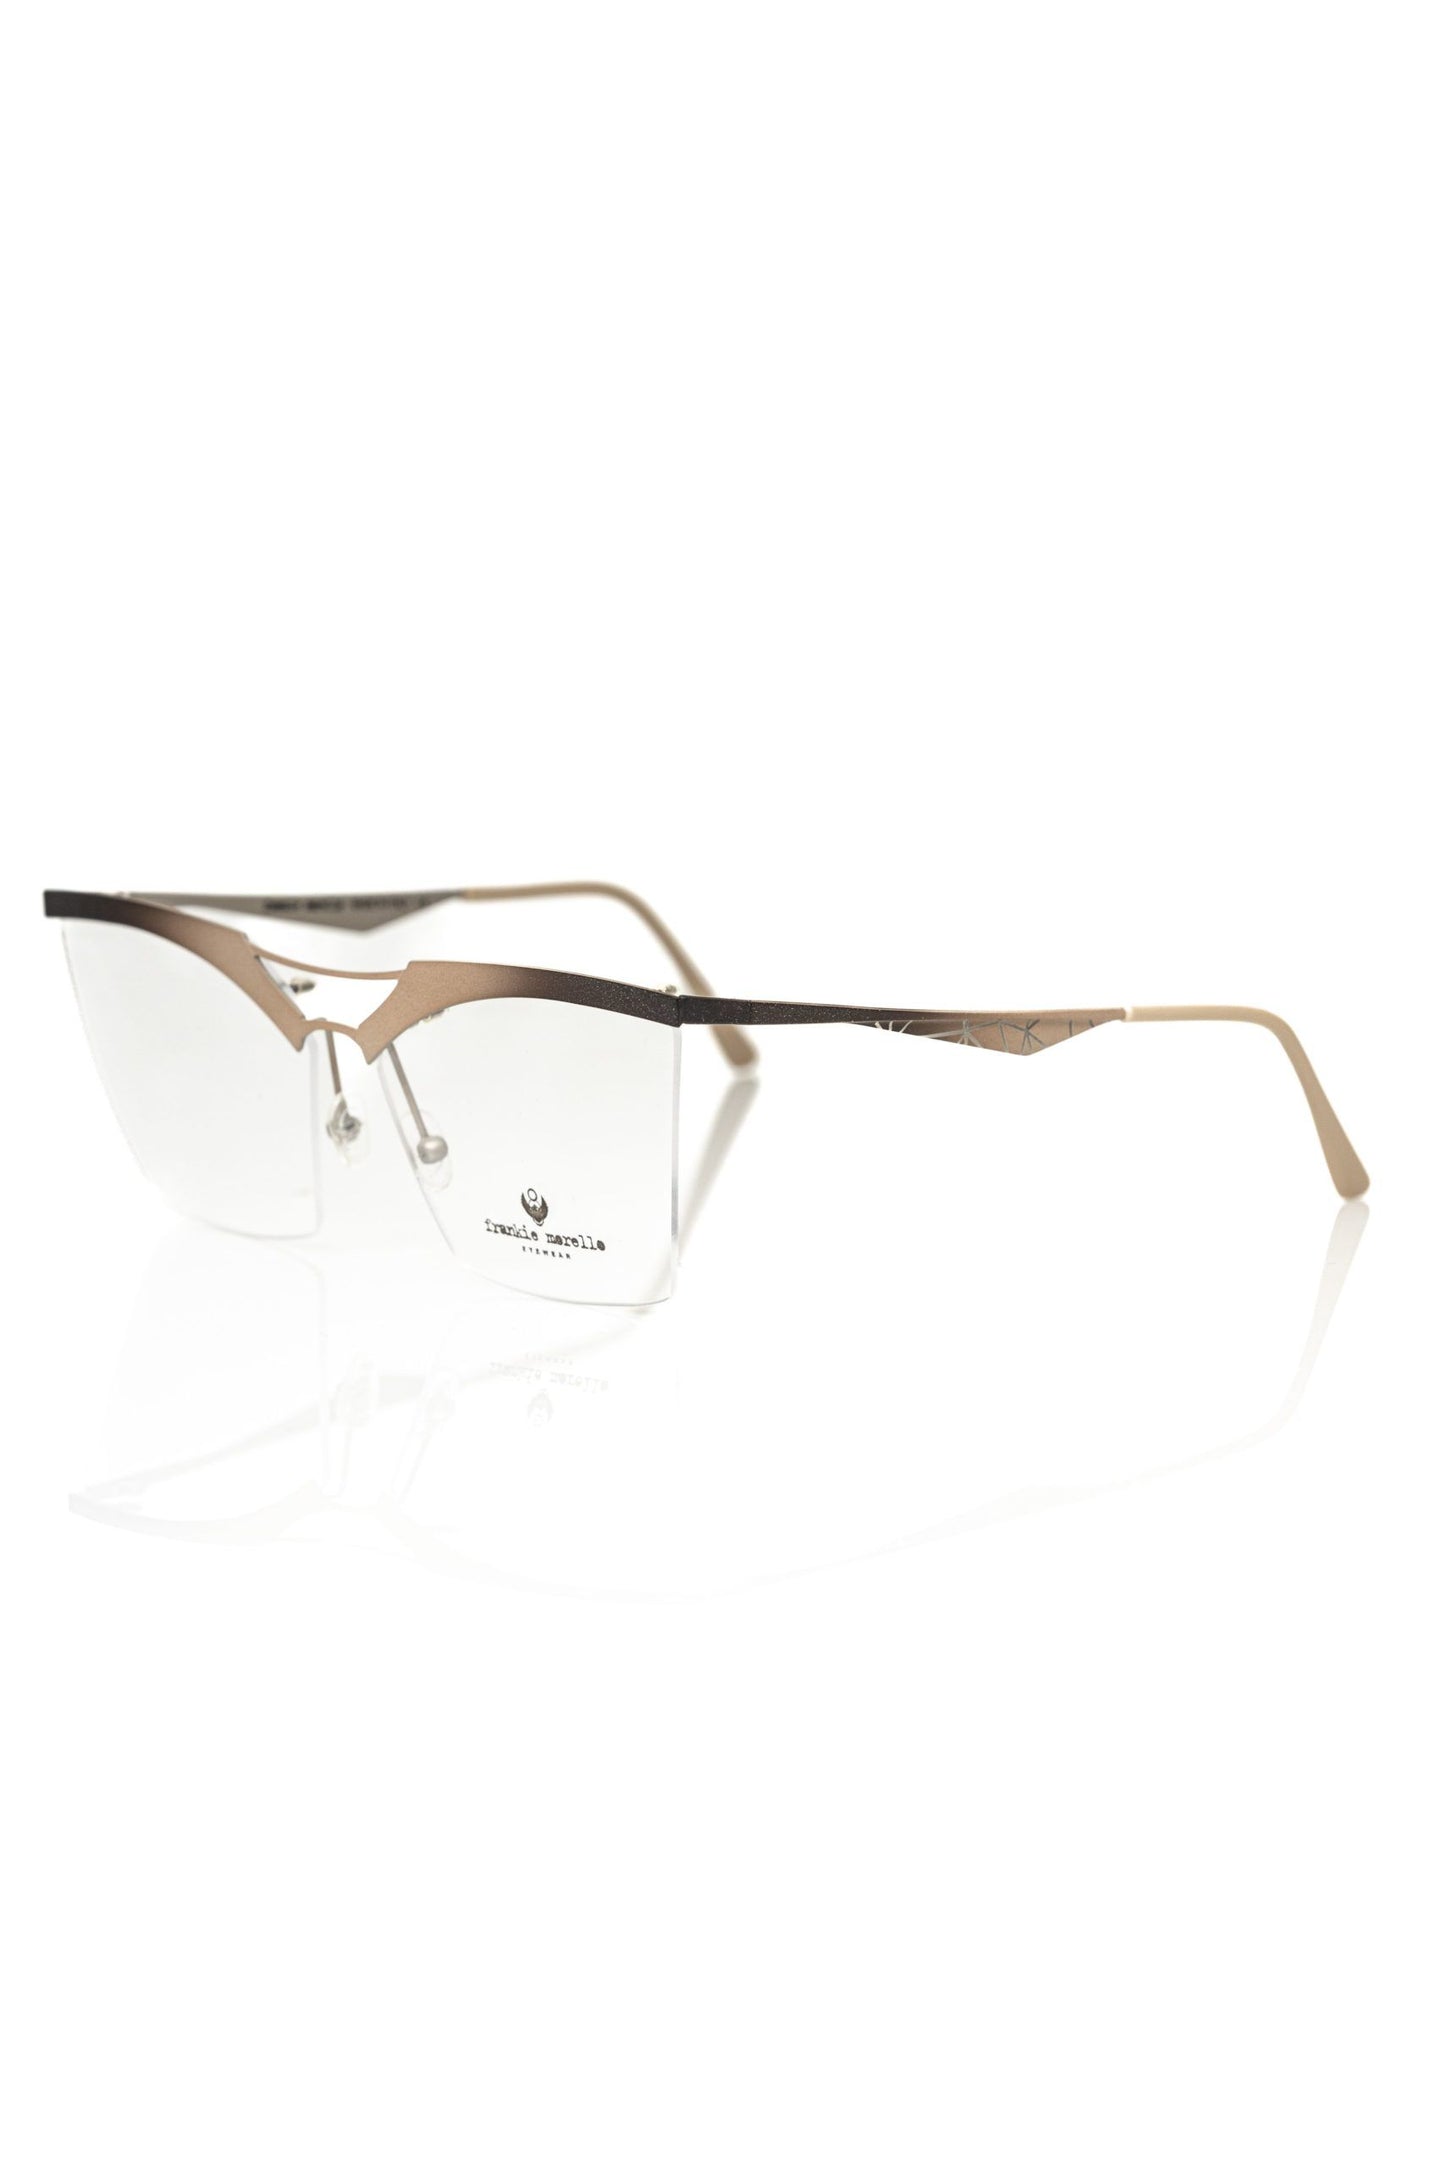 Frankie Morello FRMO-22114 Gold Metallic Fibre Frames - Designed by Frankie Morello Available to Buy at a Discounted Price on Moon Behind The Hill Online Designer Discount Store